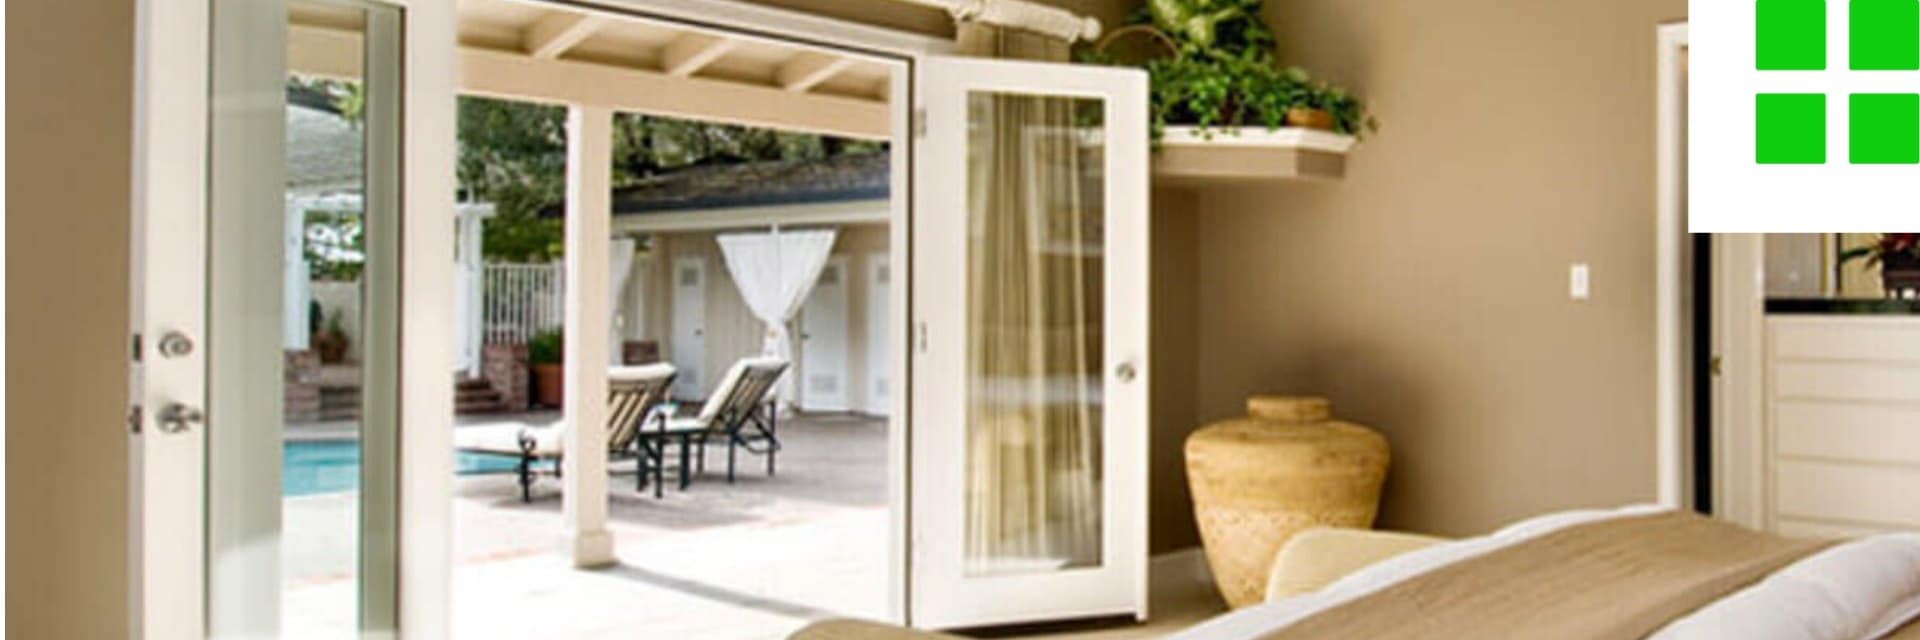 French patio doors improved aesthetic